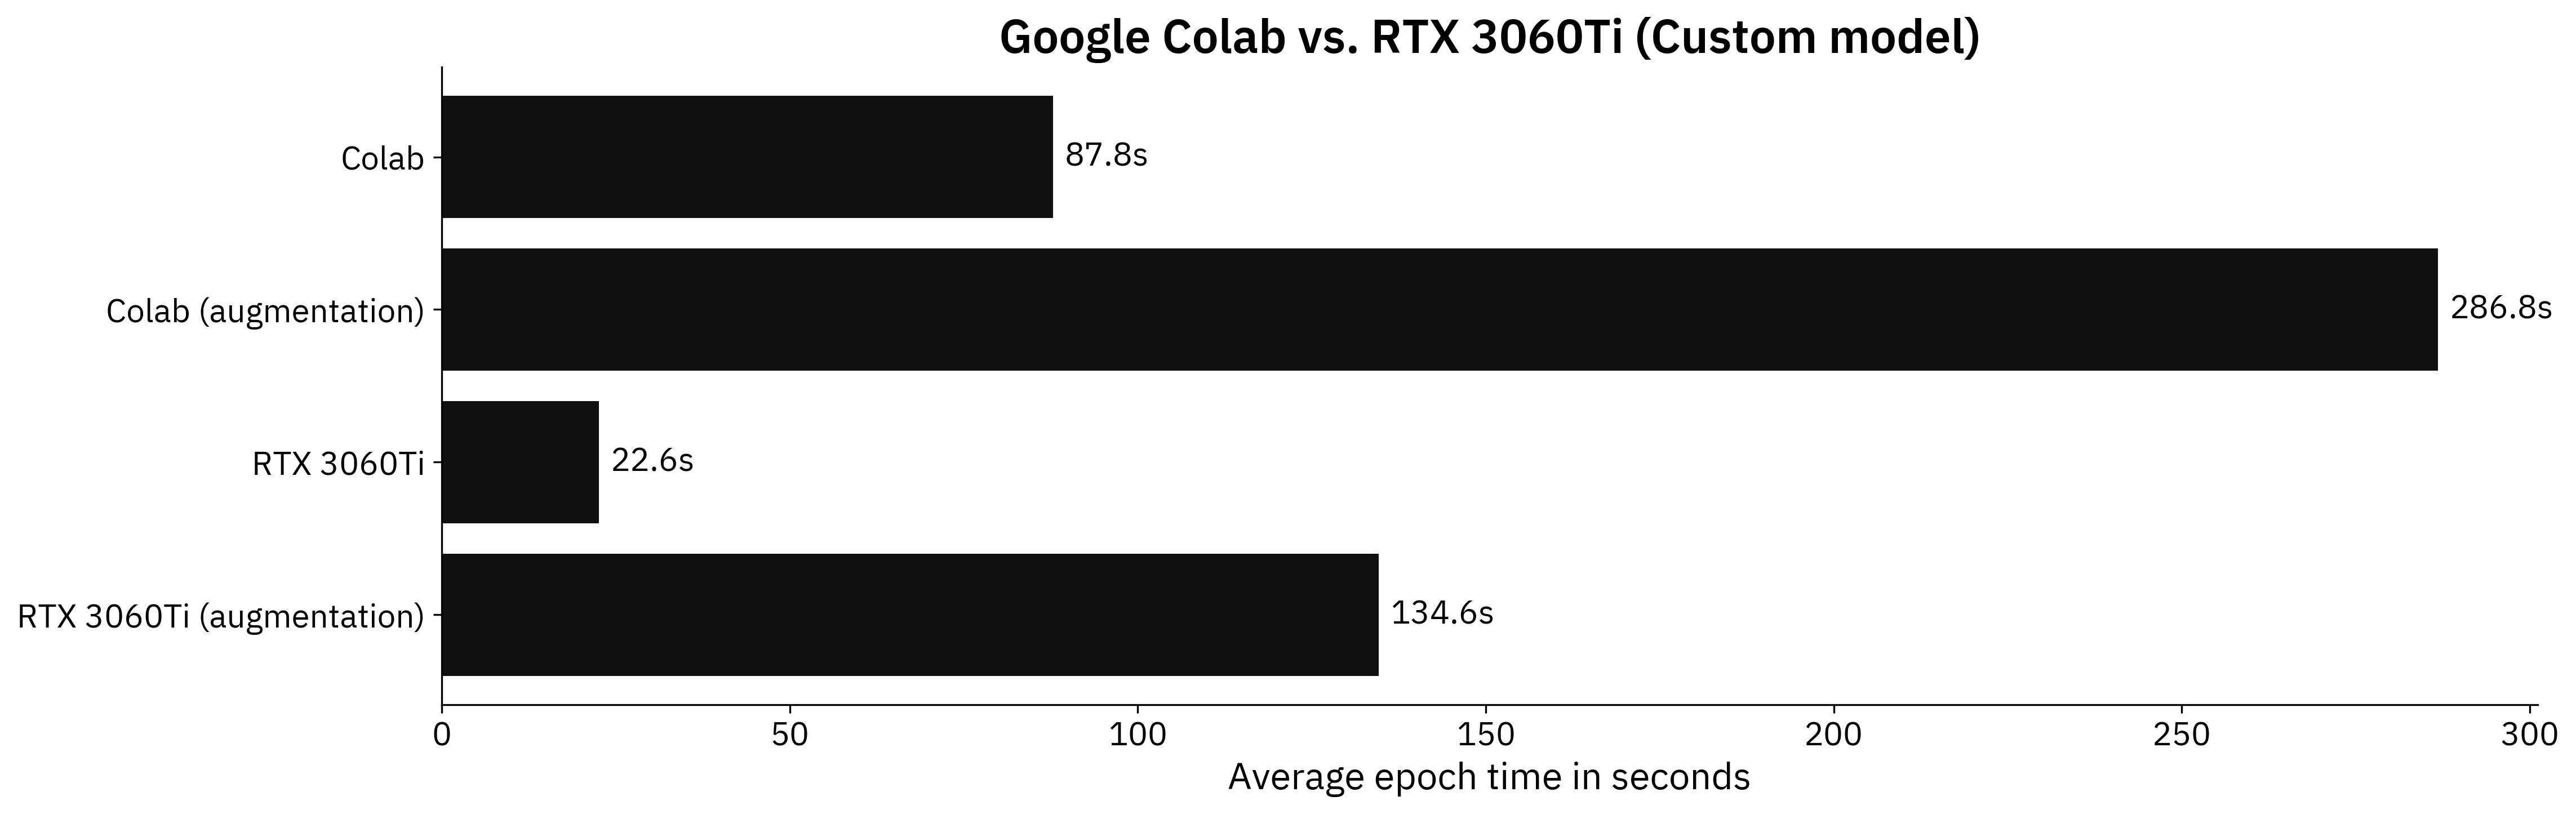 Image 2 - Benchmark results on a custom model (Colab: 87.8s; Colab (augmentation): 286.8s; RTX: 22.6s; RTX (augmentation): 134.6s) (image by author)